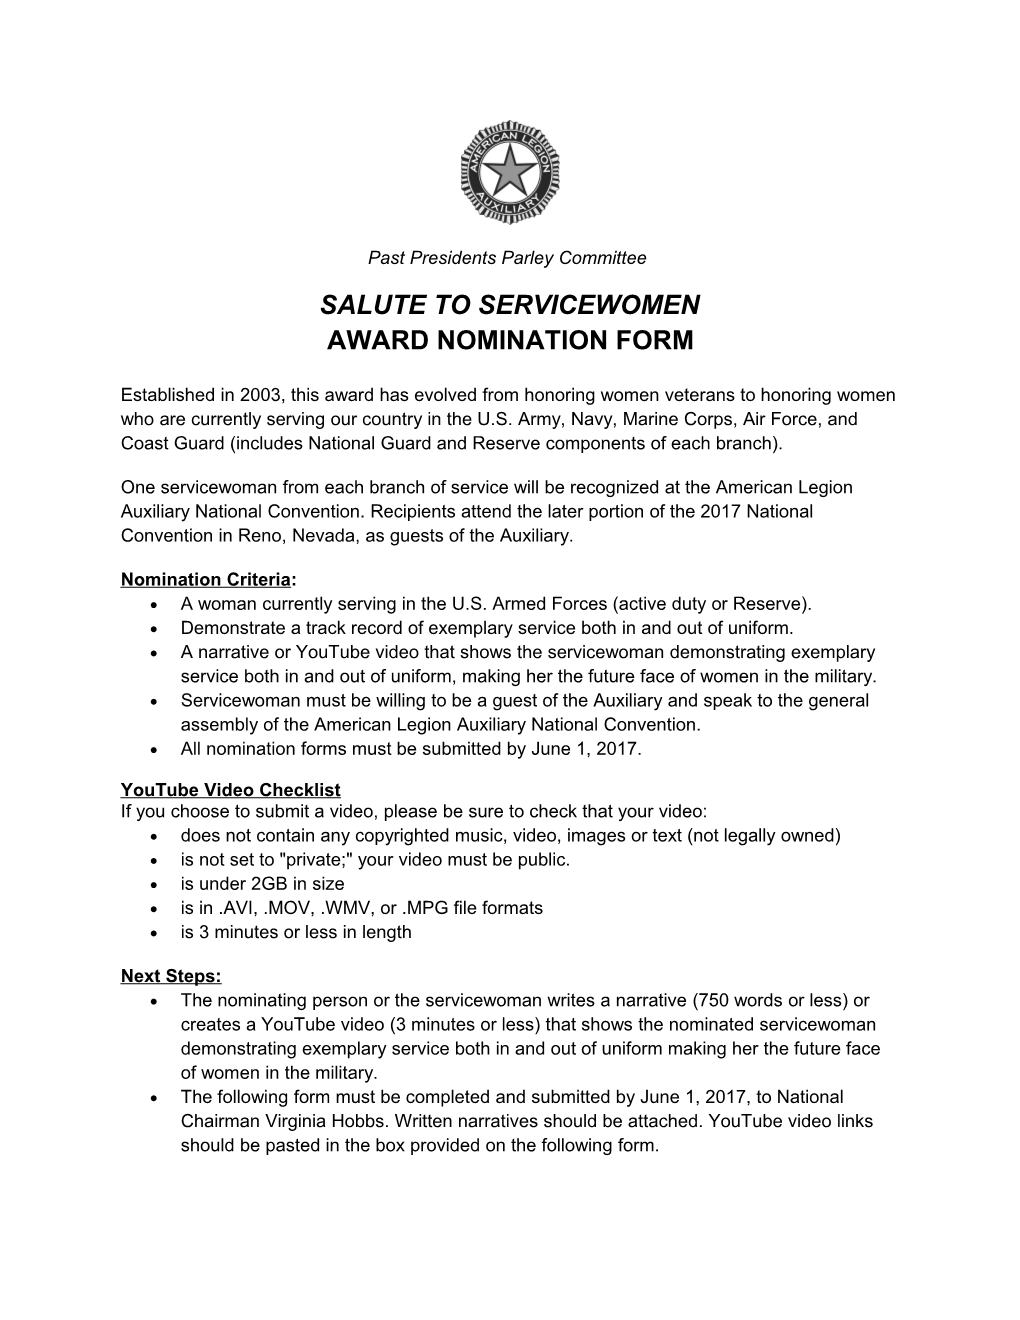 Past Presidents Parley Committee Award Entry Form